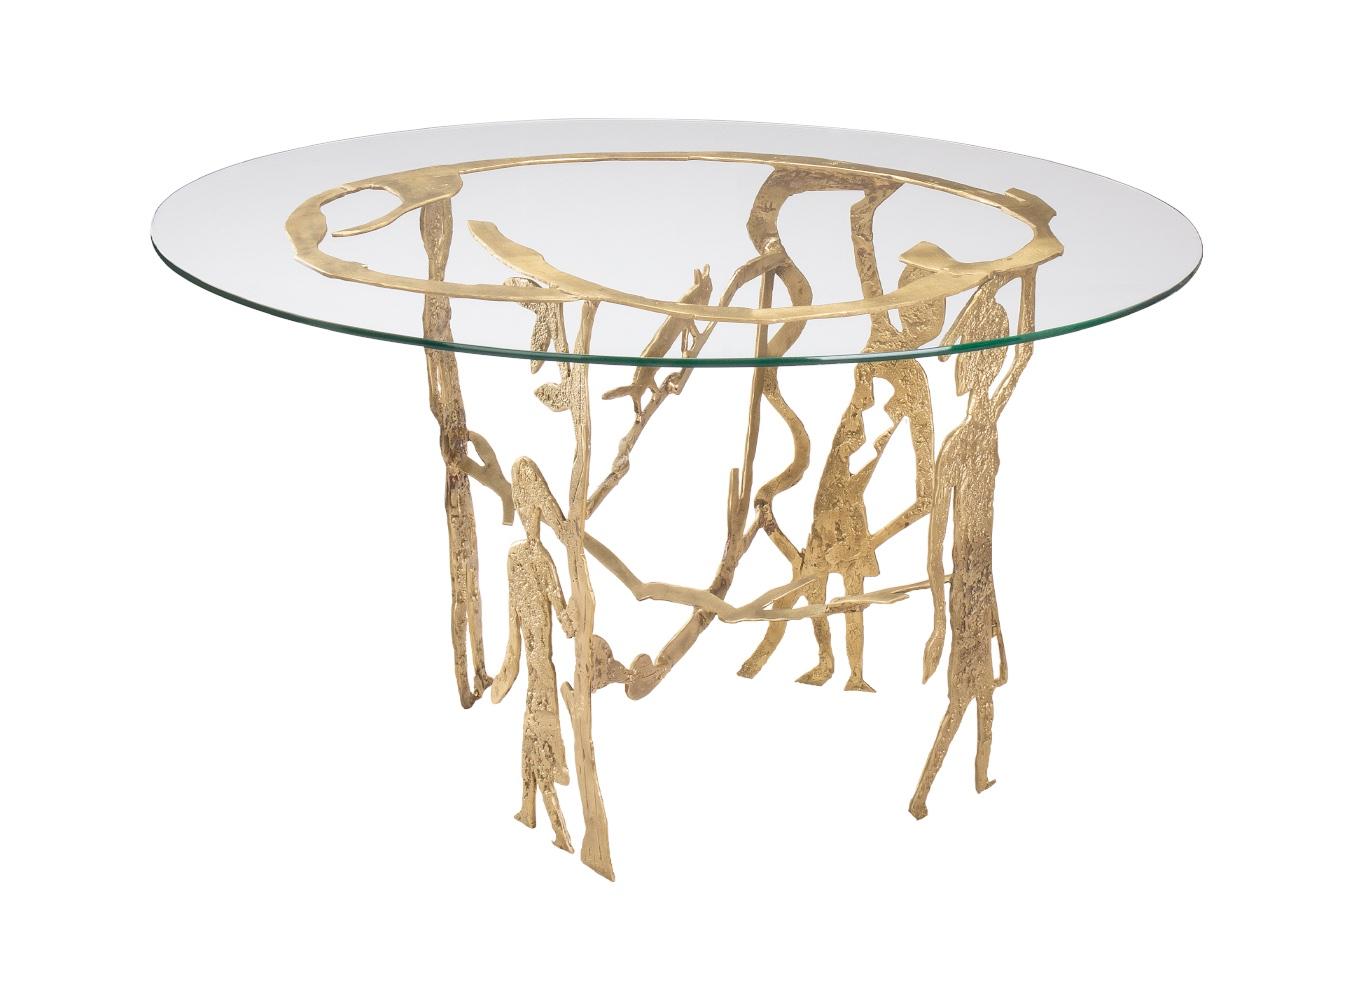 R’kan edition partnered with Mohamed Abla to create ‘The story of us’, a series of delicately crafted glass tables which speak of togetherness. Each piece recites a different tale of our human interactions, yet they all seem to lead back to our